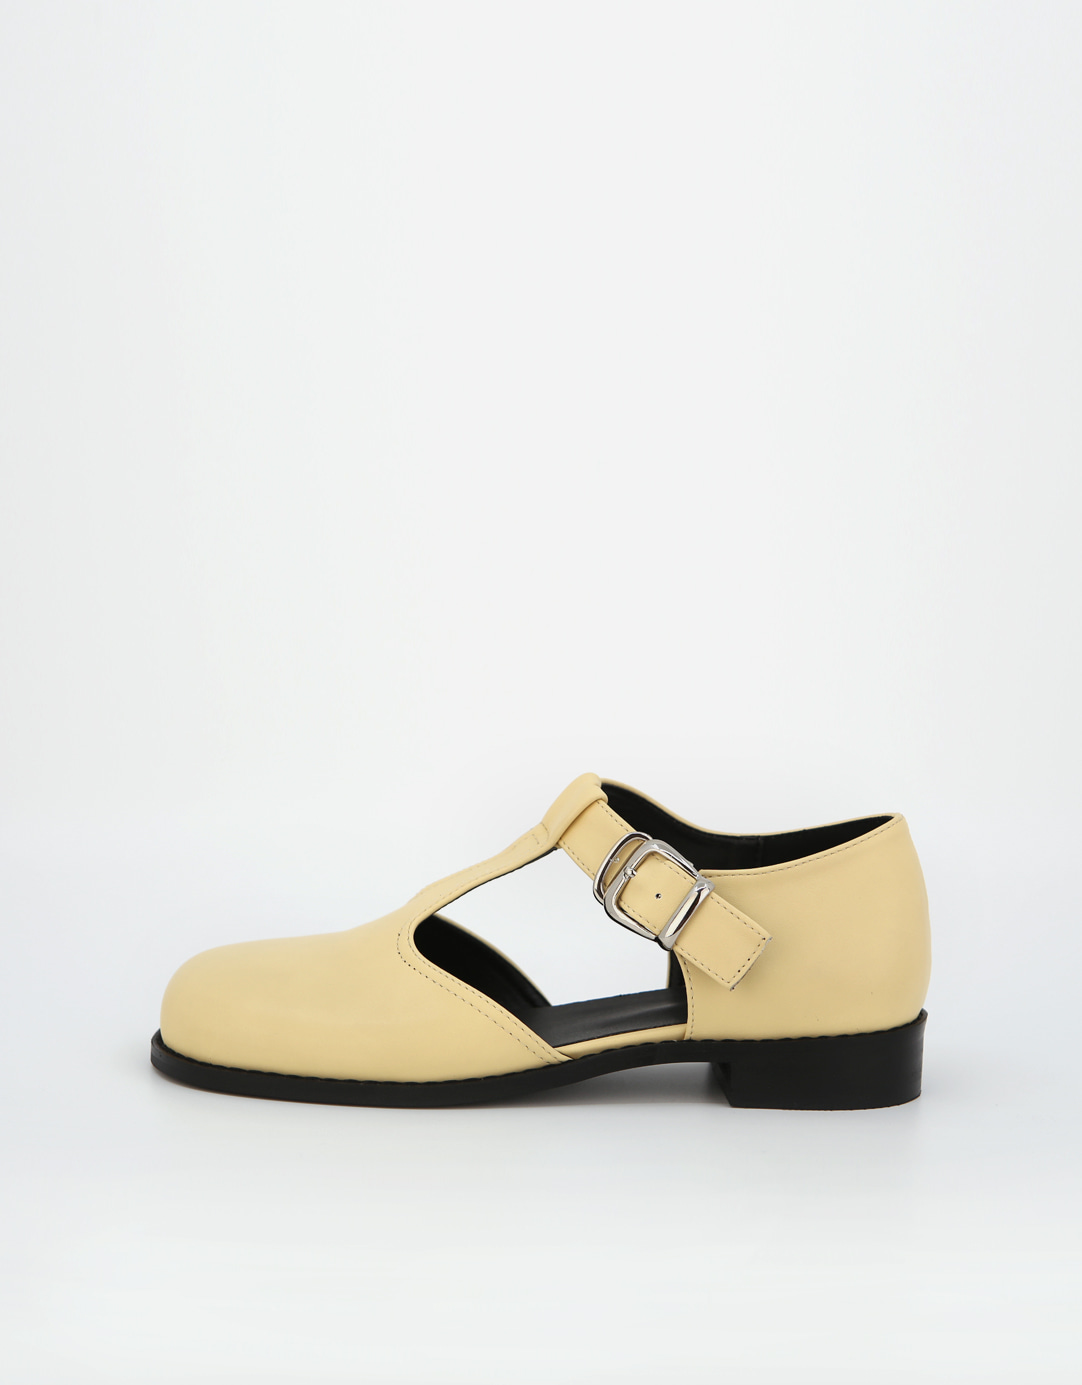 ROUND BUCKLE LOAFER